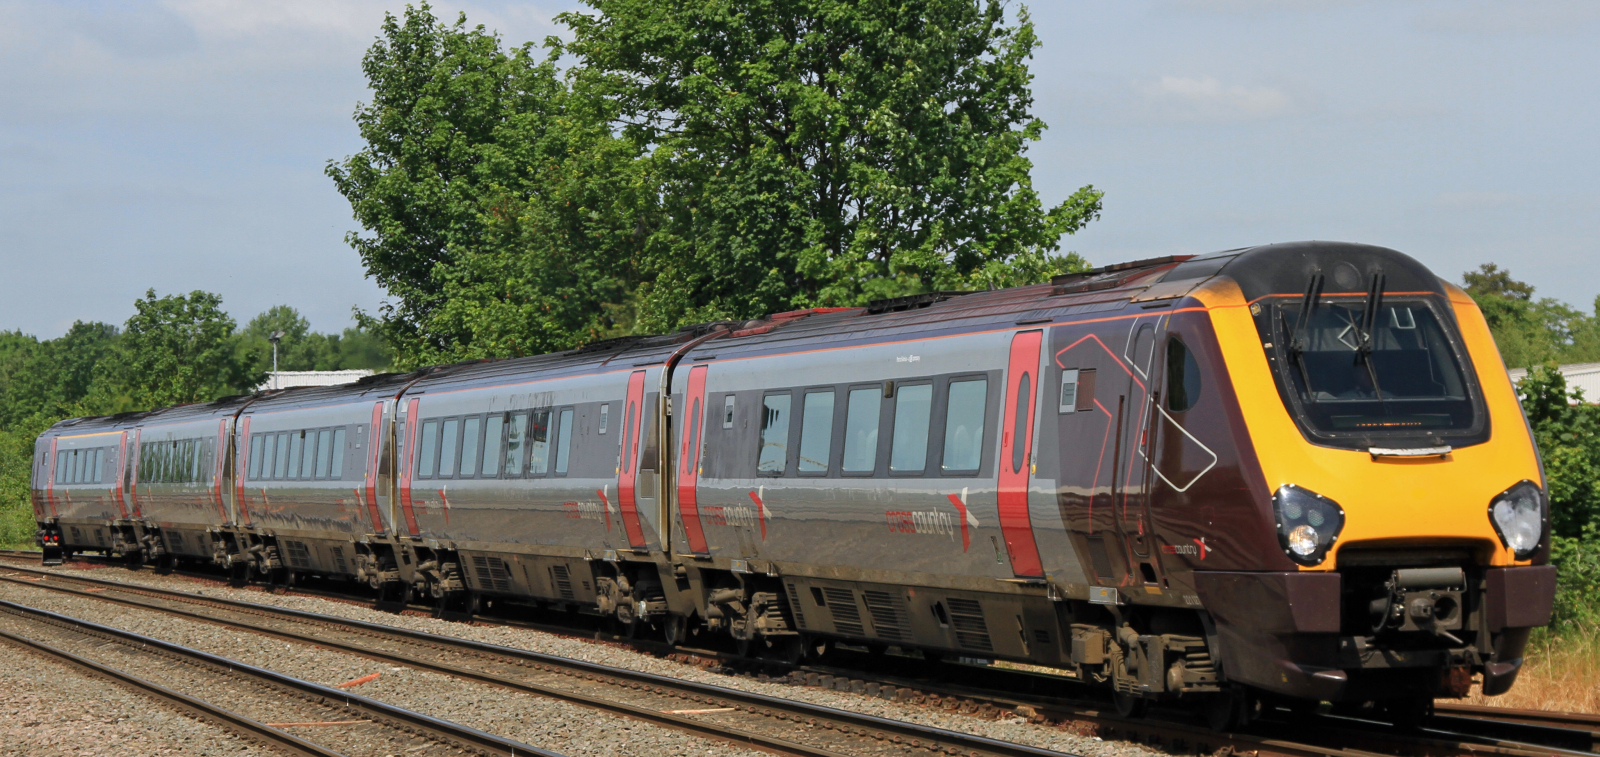 Cross Country five car Super Voyager at Leamington Spa in June 2016